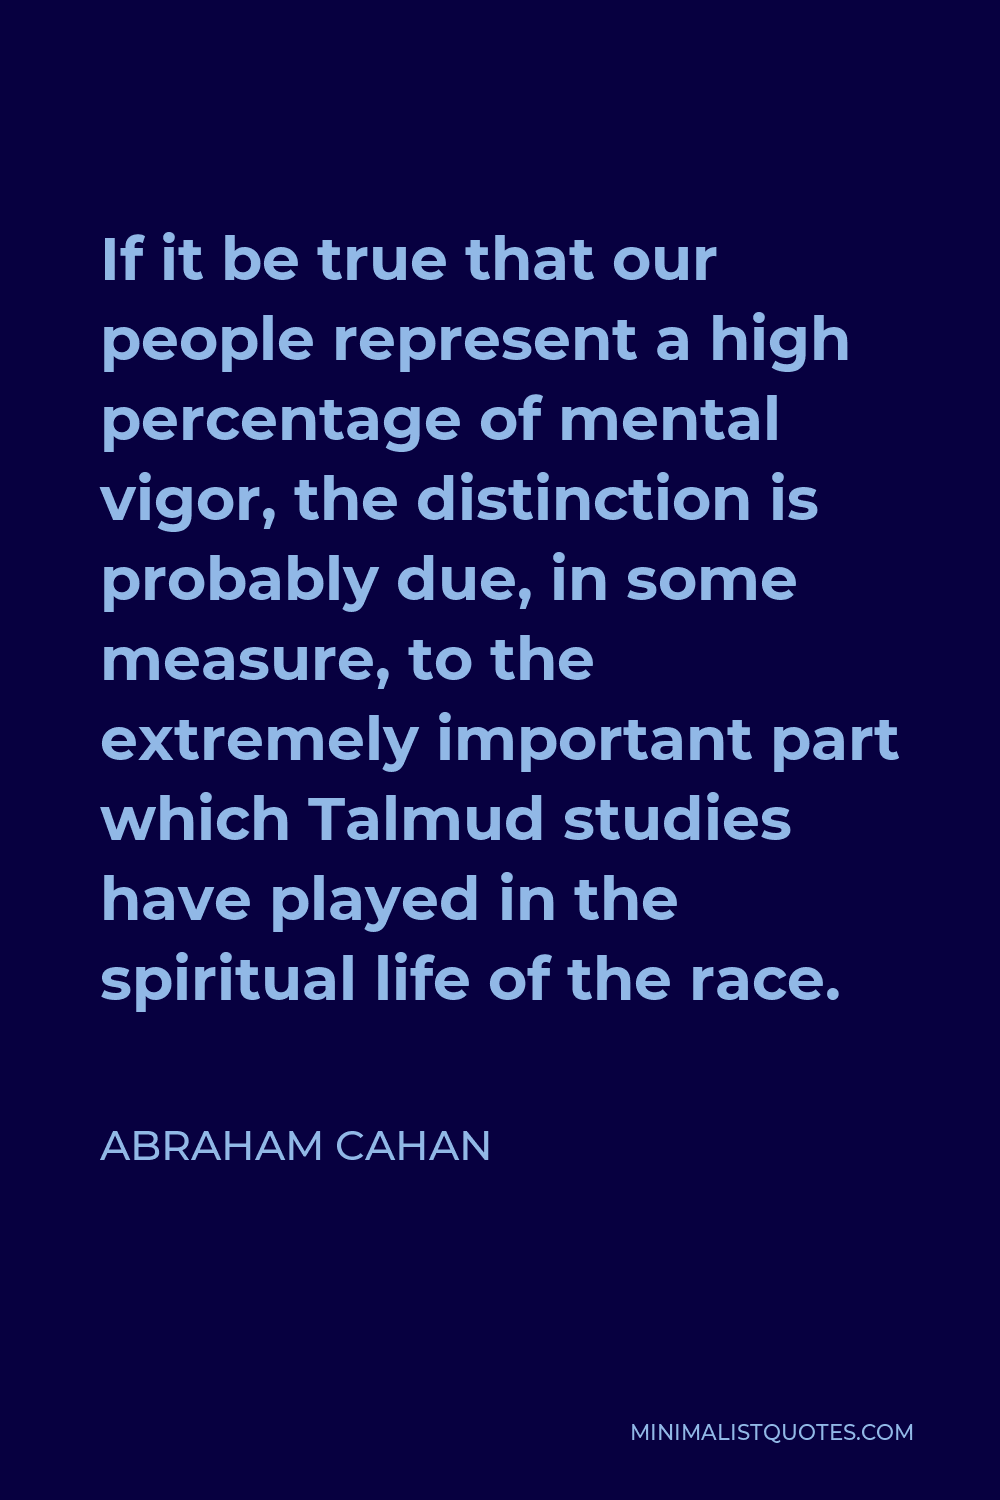 Abraham Cahan Quote - If it be true that our people represent a high percentage of mental vigor, the distinction is probably due, in some measure, to the extremely important part which Talmud studies have played in the spiritual life of the race.